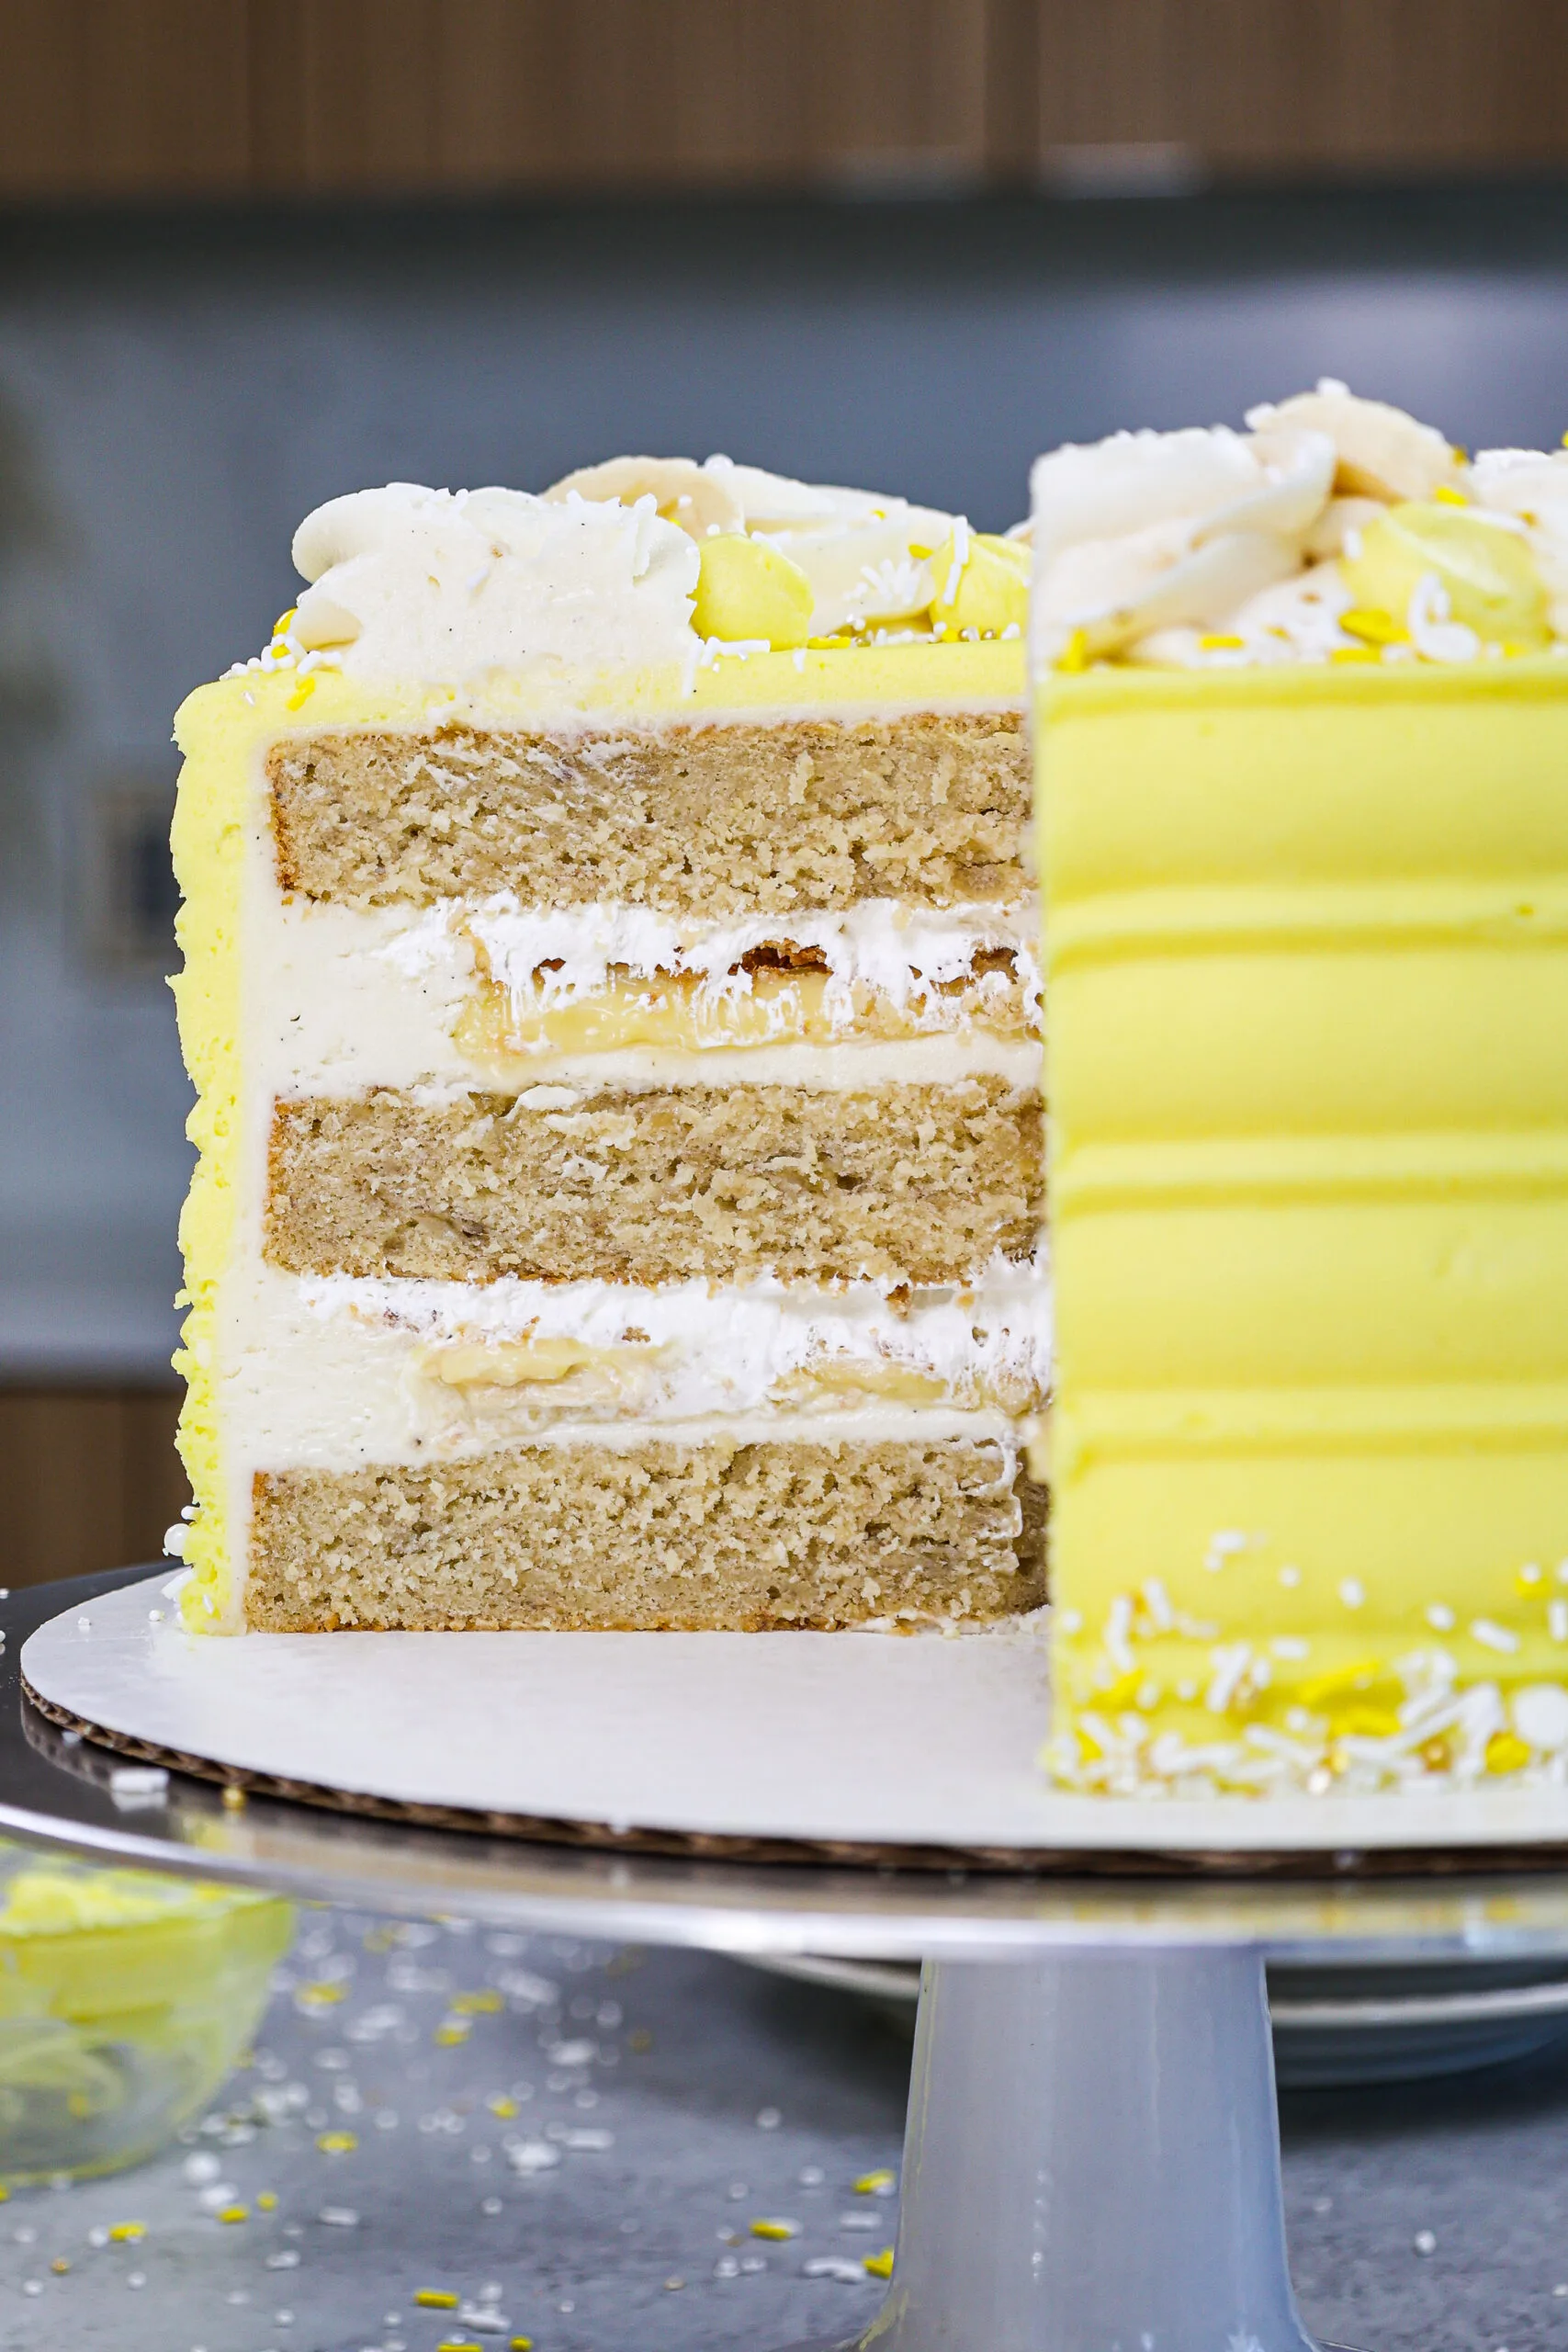 image of a cross section of a banana pudding cake showing it's layers of banana cake and banana pudding filling